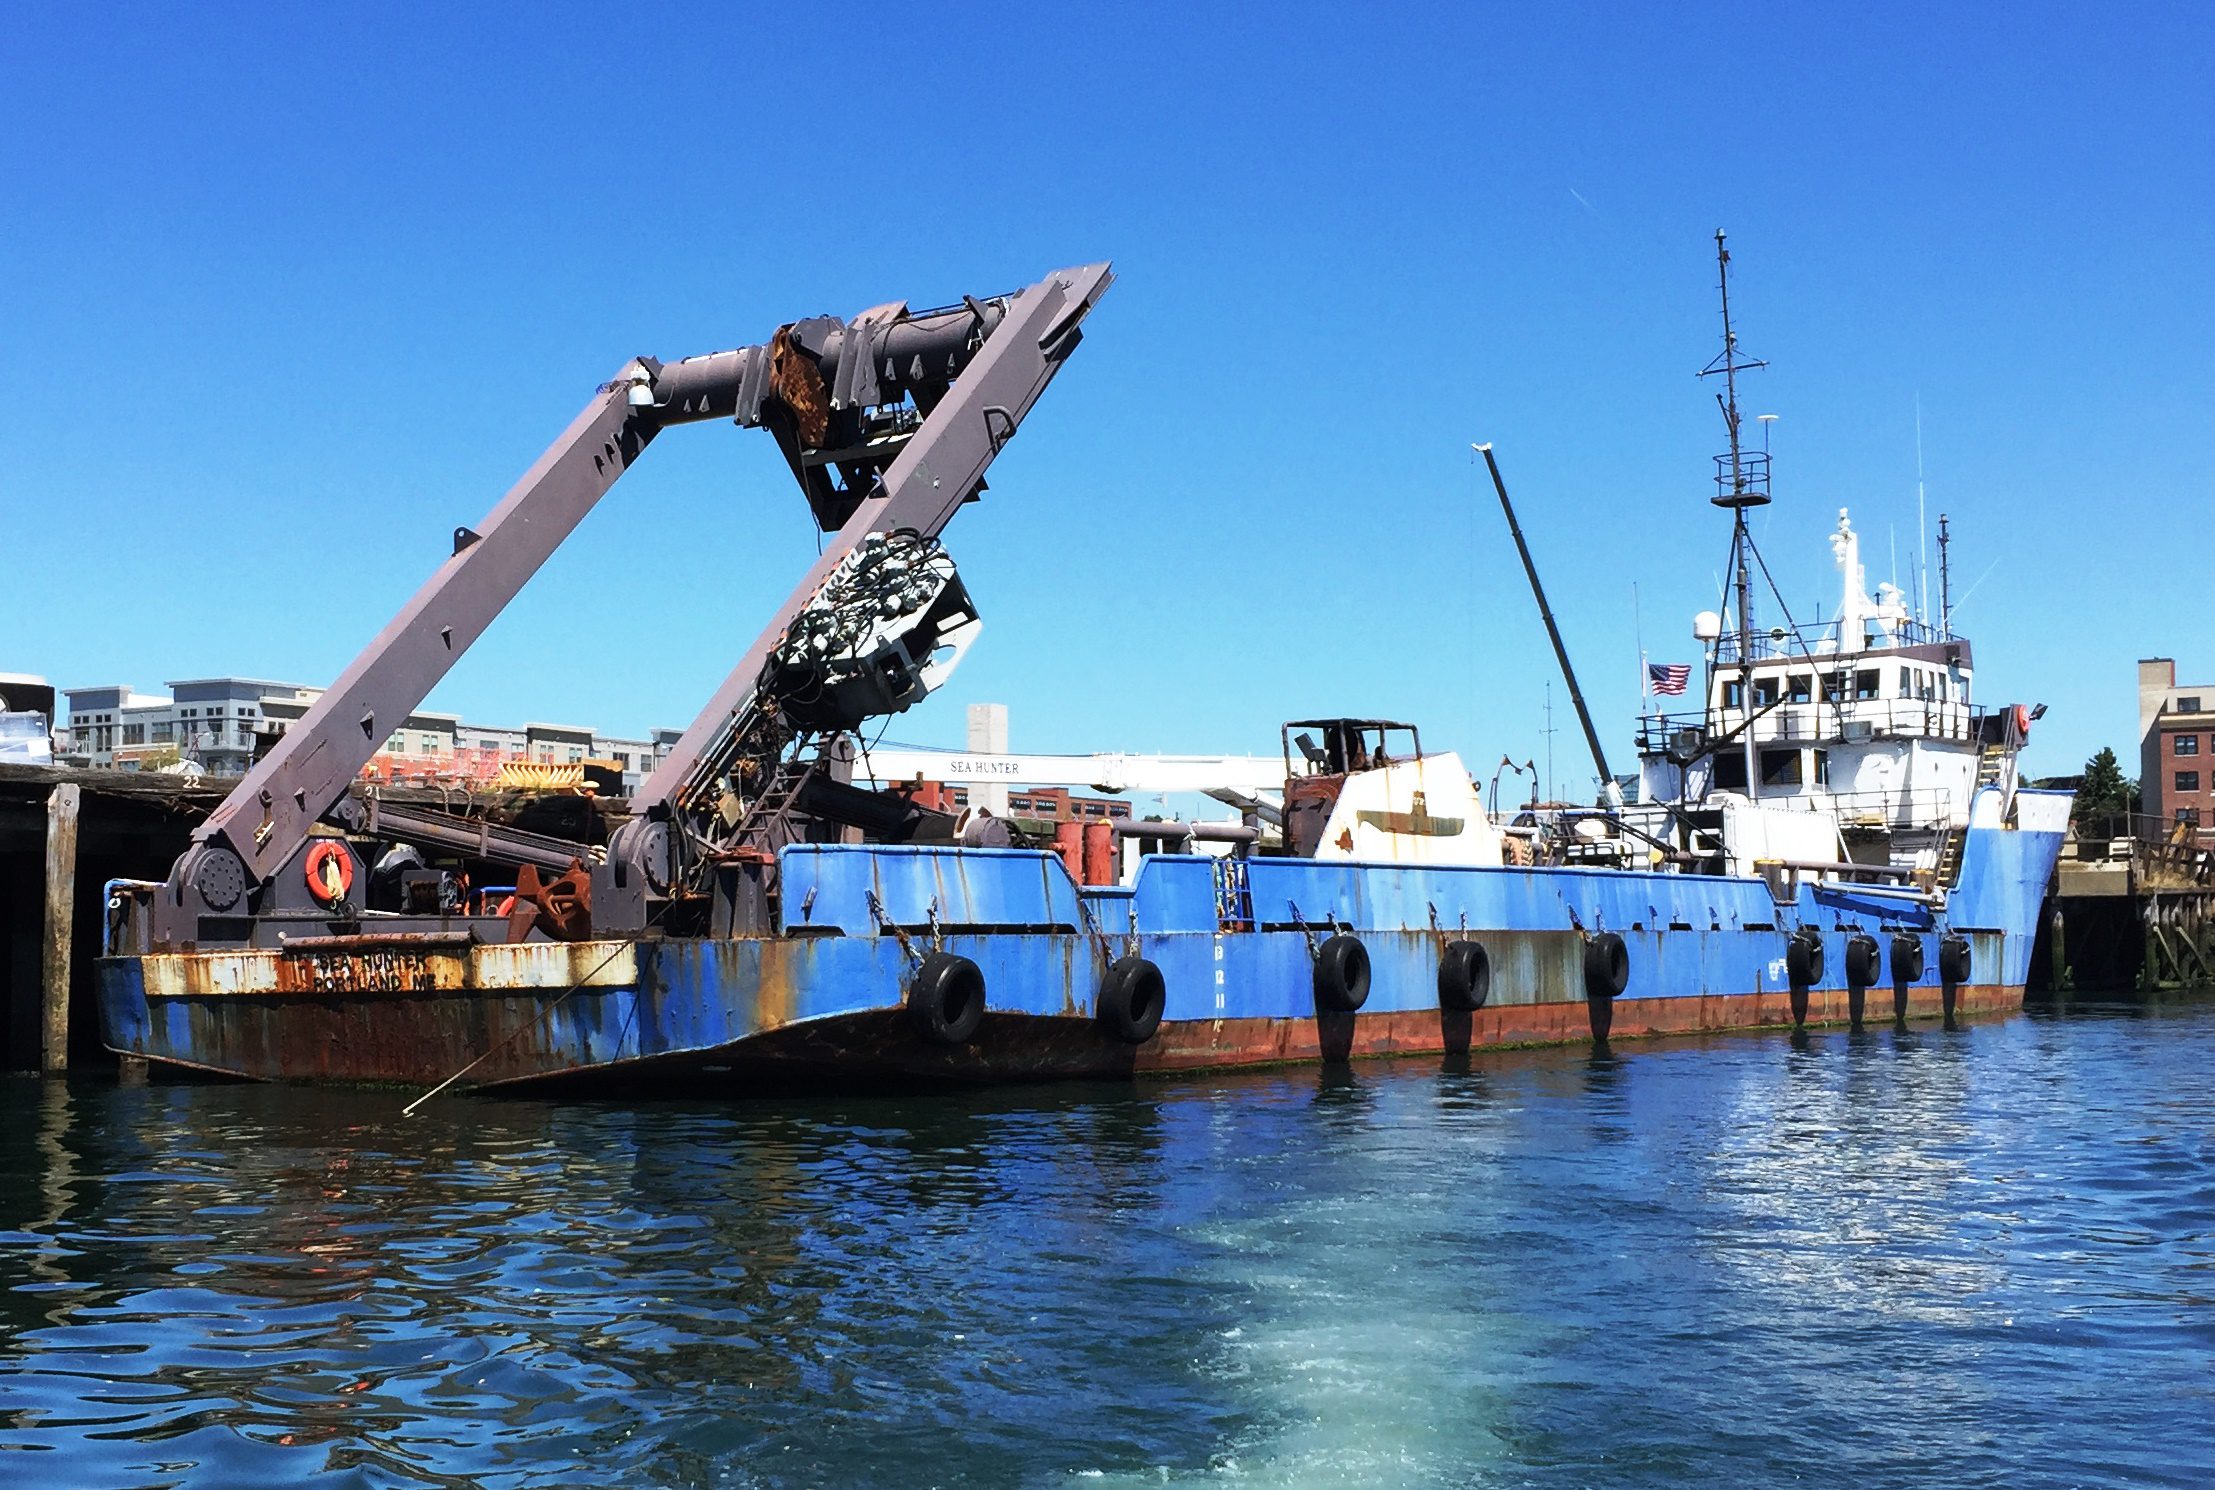 “Sea Hunter” 240 ft Salvage Ship For Sale by Marshall’s Auction [Sponsored]